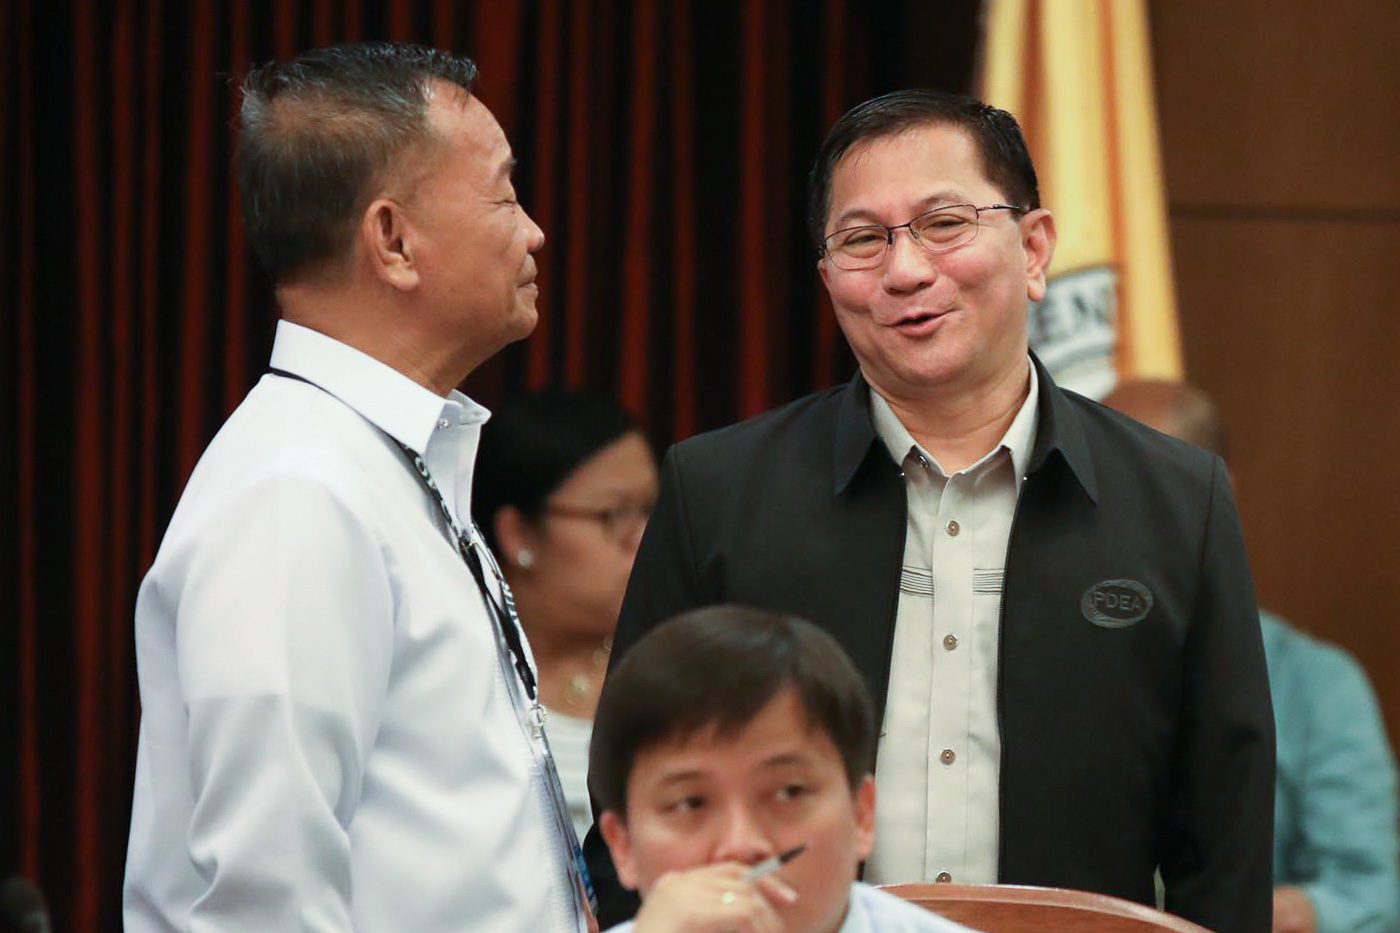 SHABU PROBE. Customs Commissioner Isidro Lapena (left) and PDEA Director Aaron Aquino on September 27, 2018, during the Committee on Dangerous Drugs hearing in Congress into the P6.8 billion worth of shabu smuggled into the country from China and Taiwan. Photo by Darren Langit/Rappler 